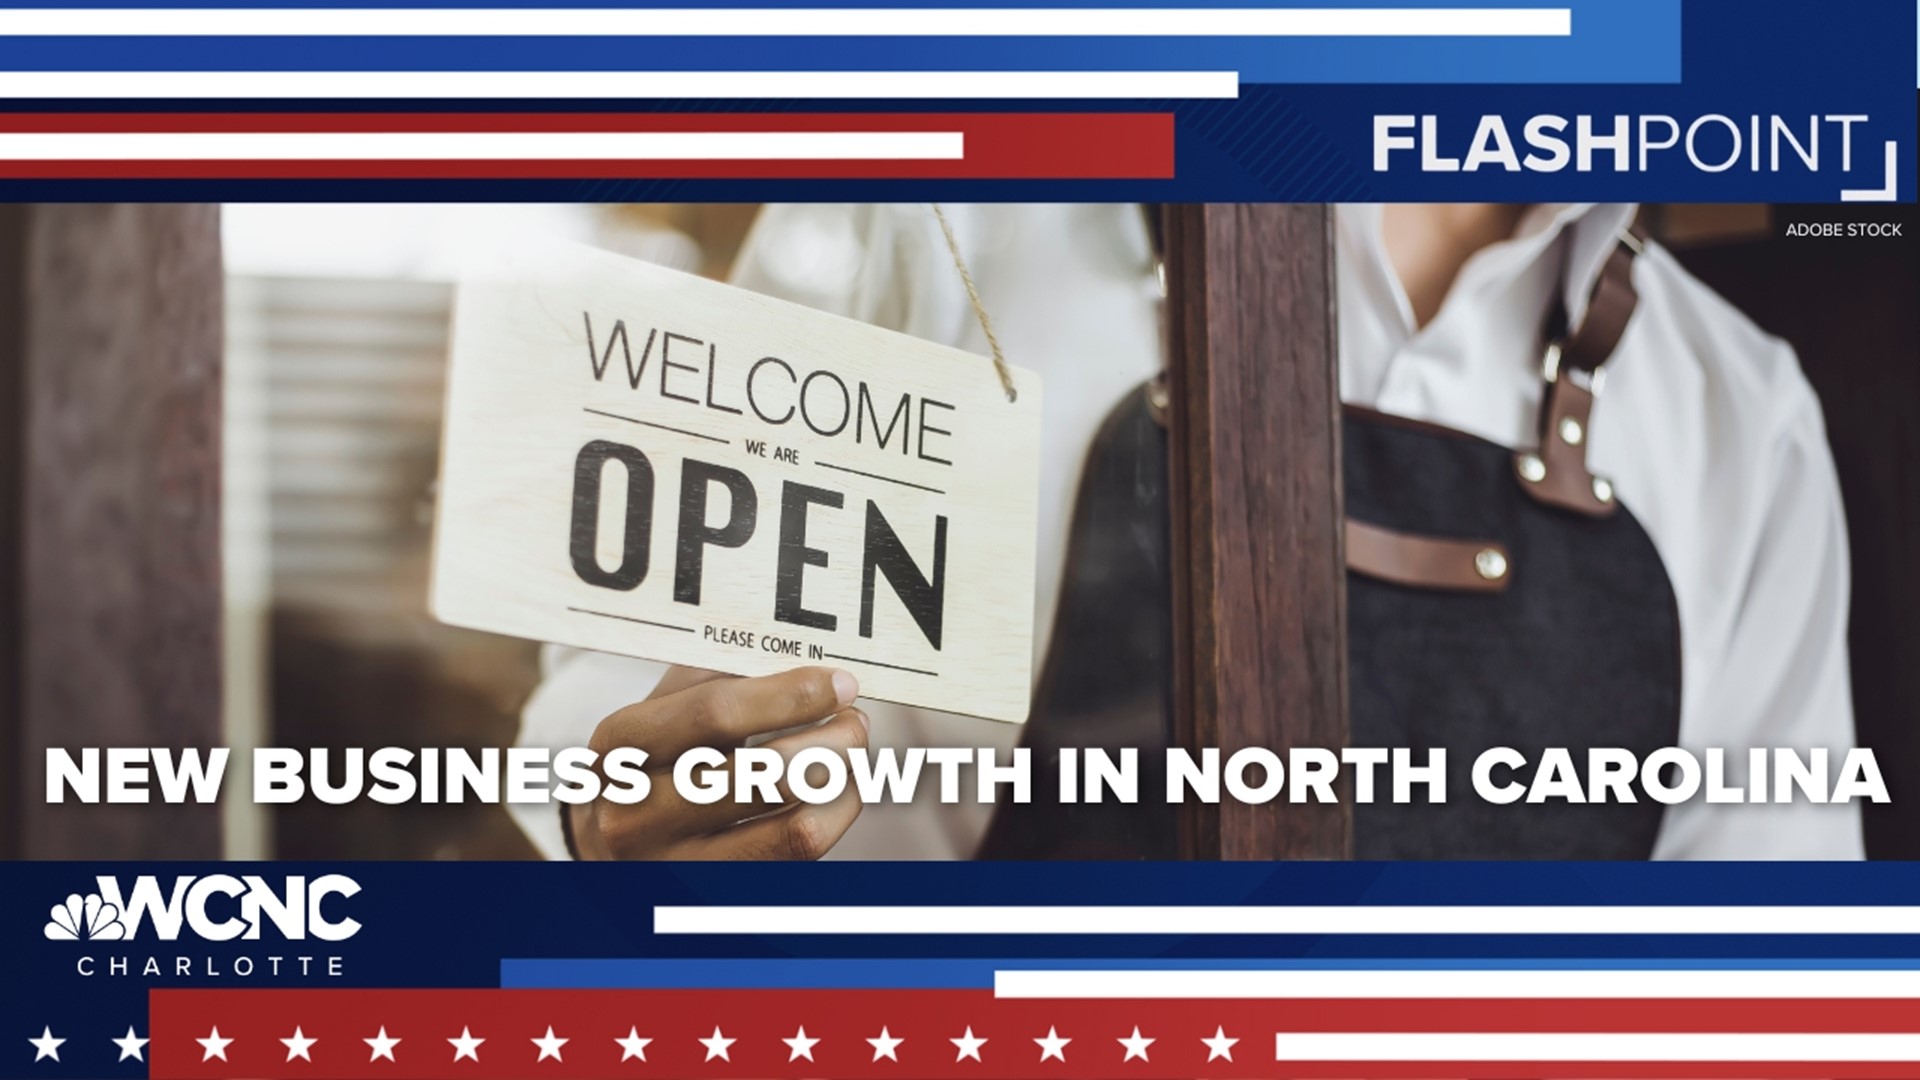 On Flashpoint, North Carolina Secretary of State, Elaine Marshall about the growth of new businesses in NC over the second quarter.